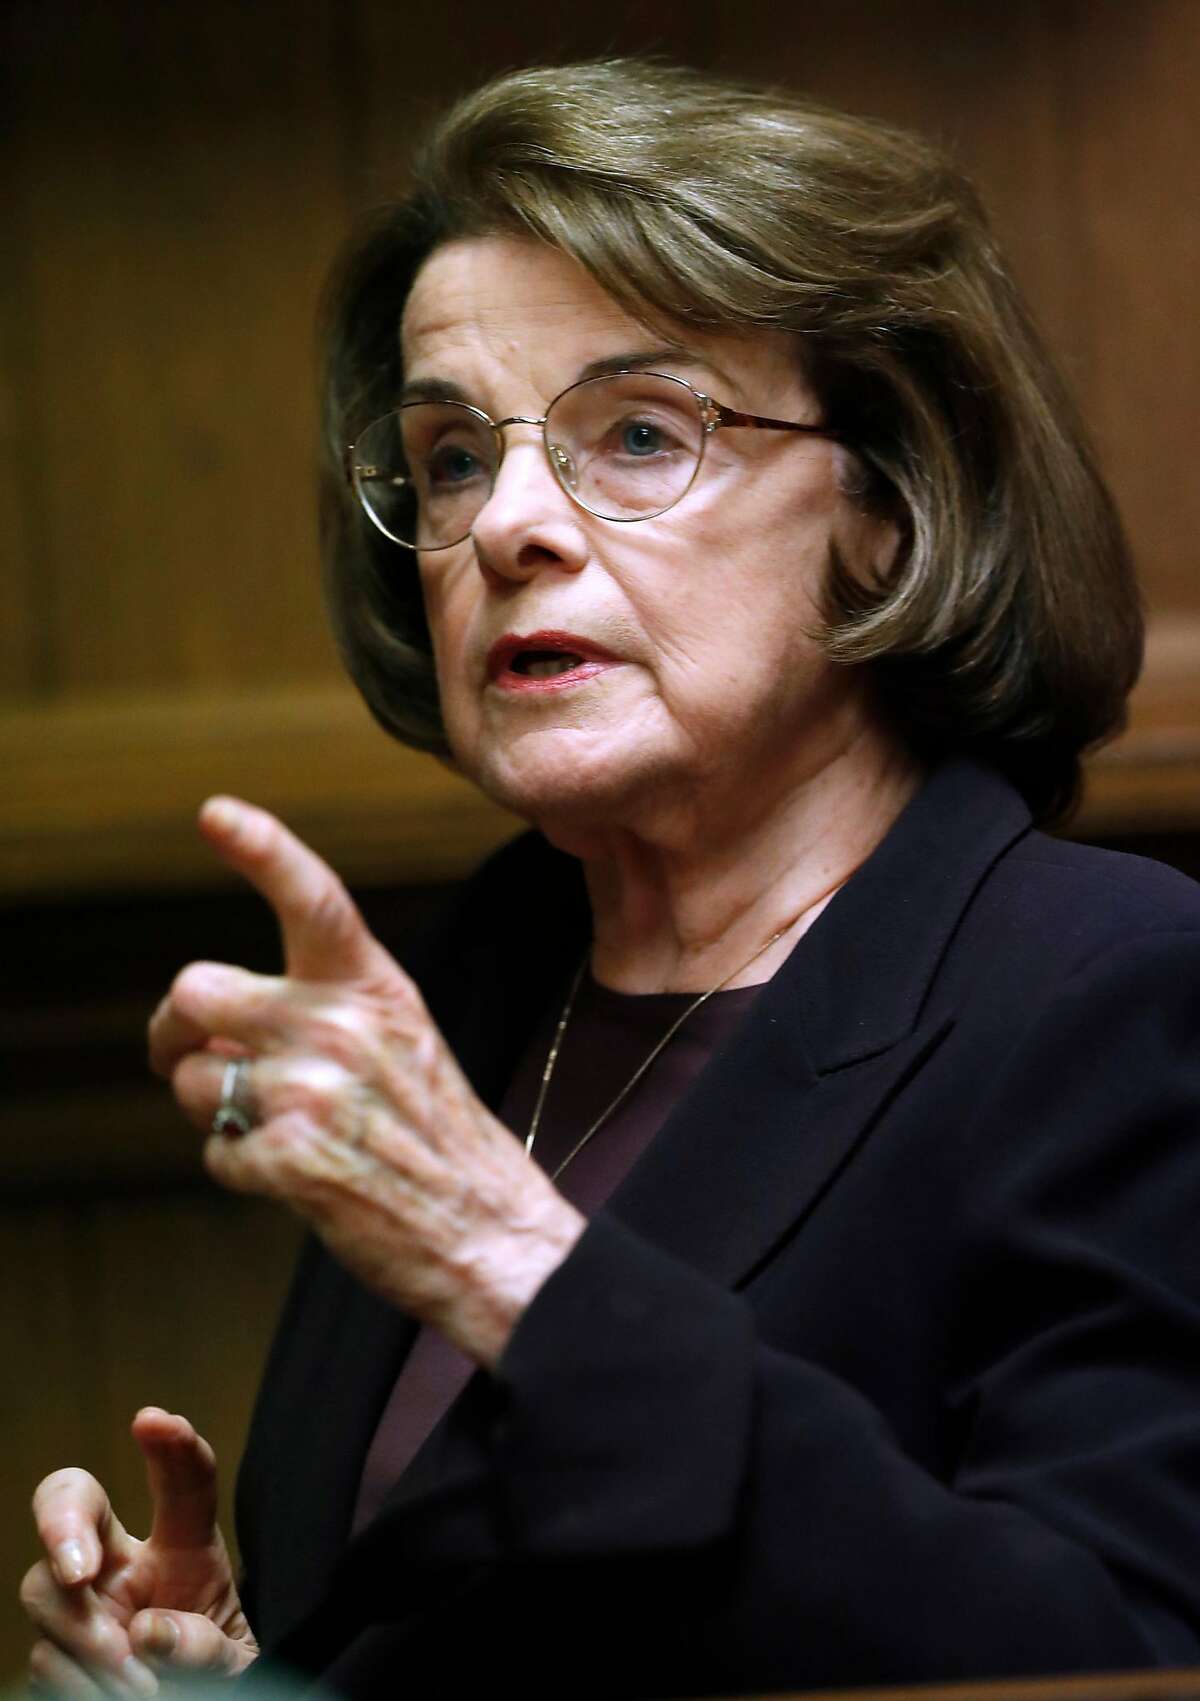 United States' Senator Dianne Feinstein, seen here in an April 2018 picture, has decided not to seek to retain her position as the top Democrat on the Senate Judiciary Committee.